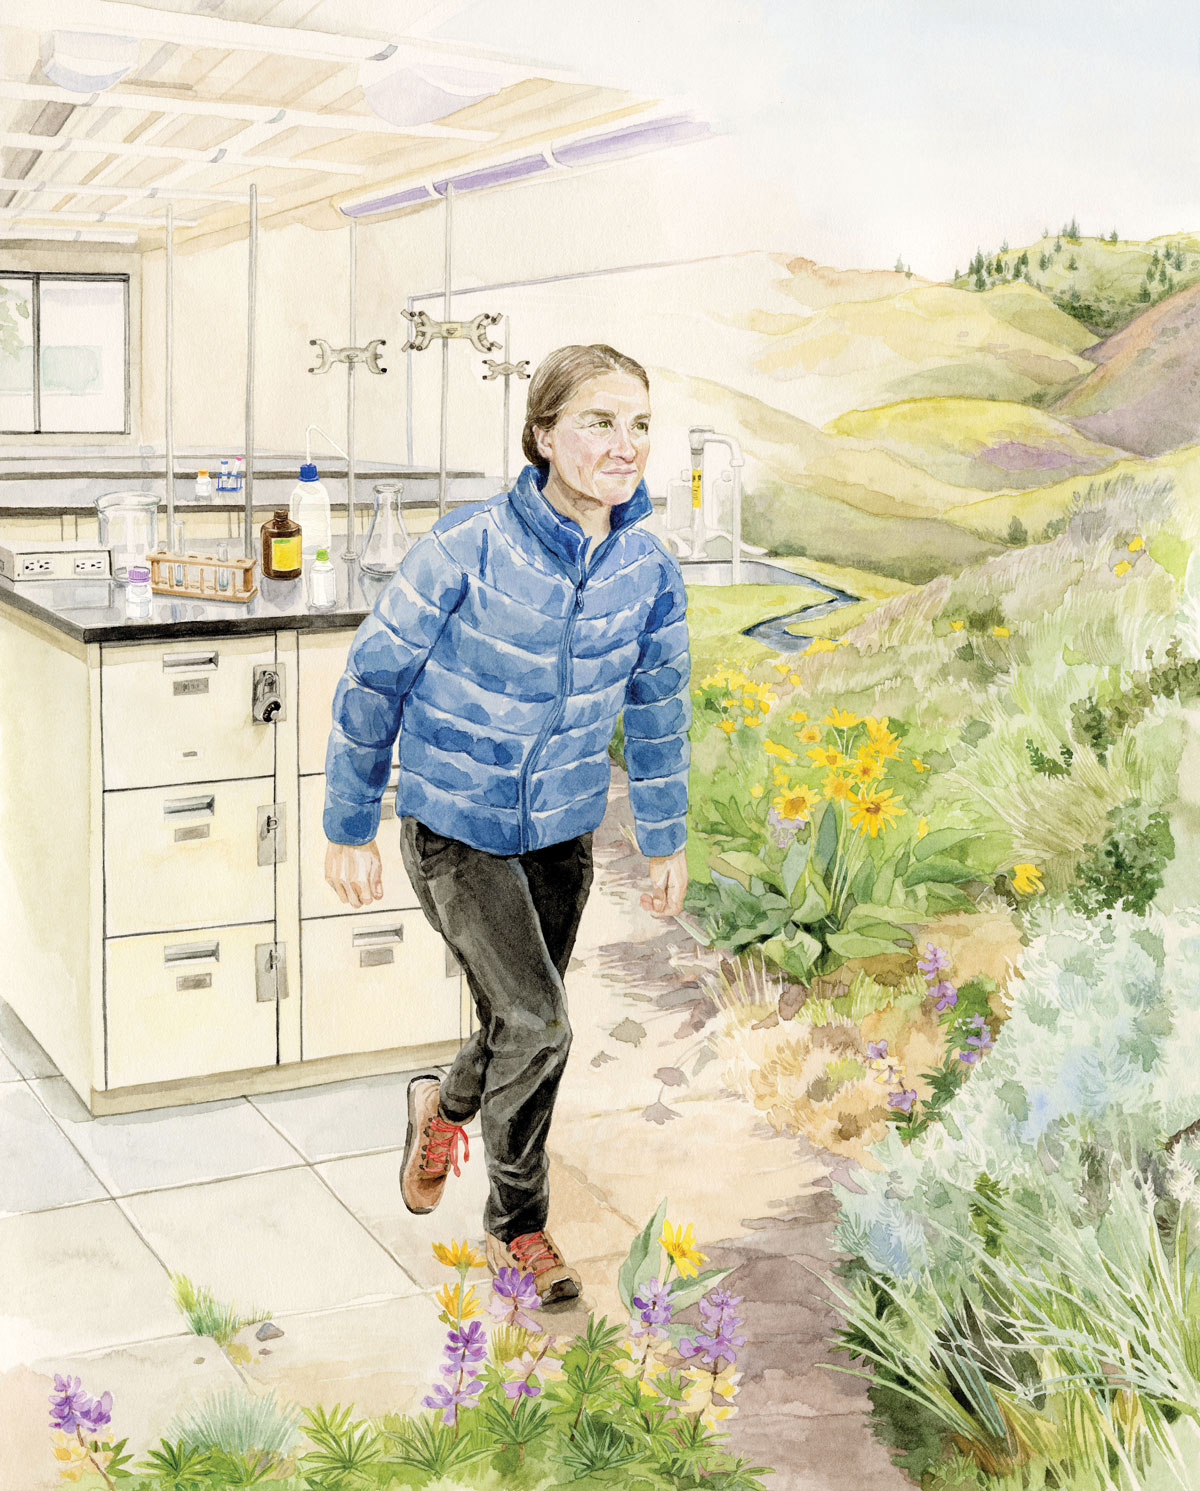 woman with hiking shoes and jacket in a surreal scene moving from a science lab to a wildflower covered mountain landscape